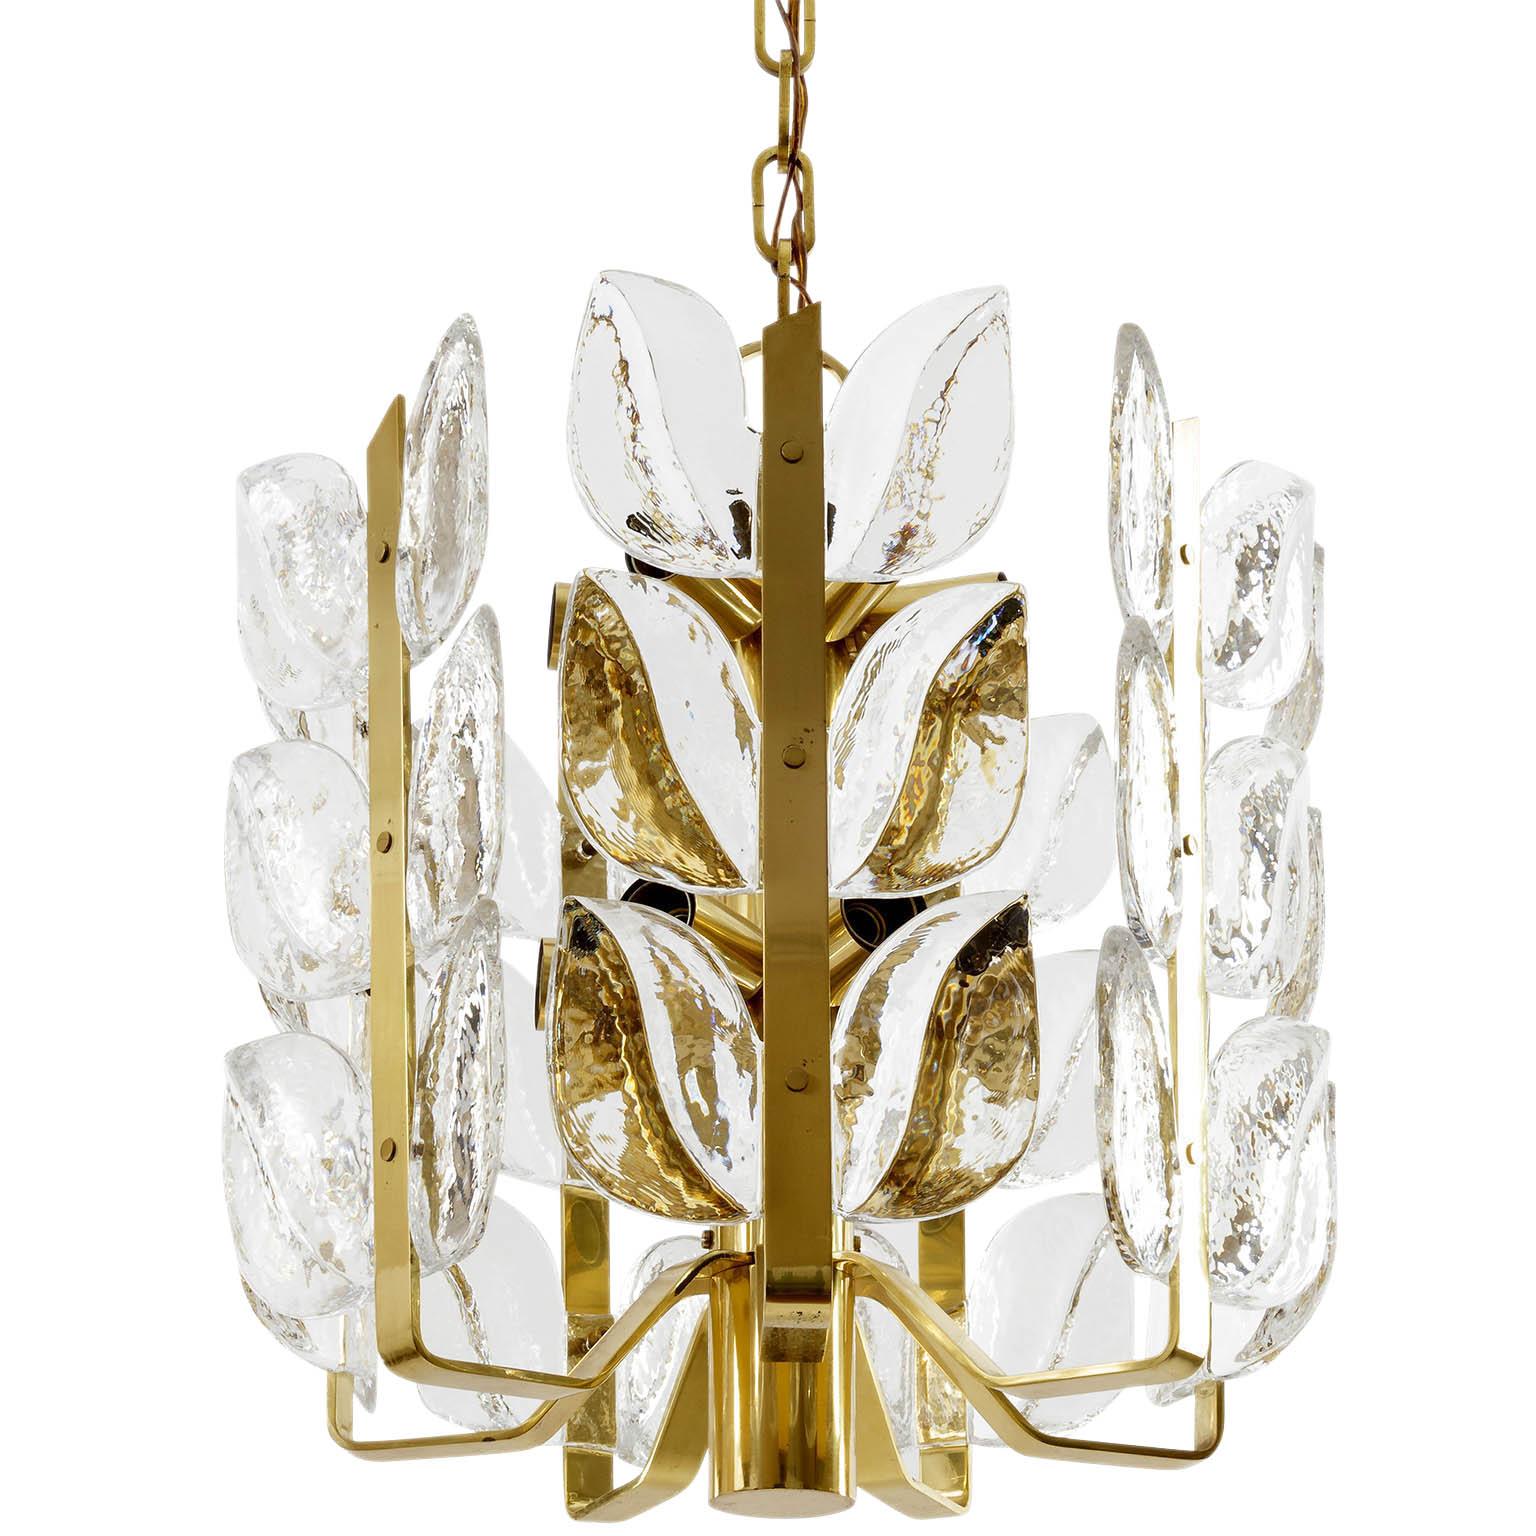 Austrian One of Two Kalmar Chandeliers or Pendant Lights 'Florida', Glass and Brass, 1970 For Sale